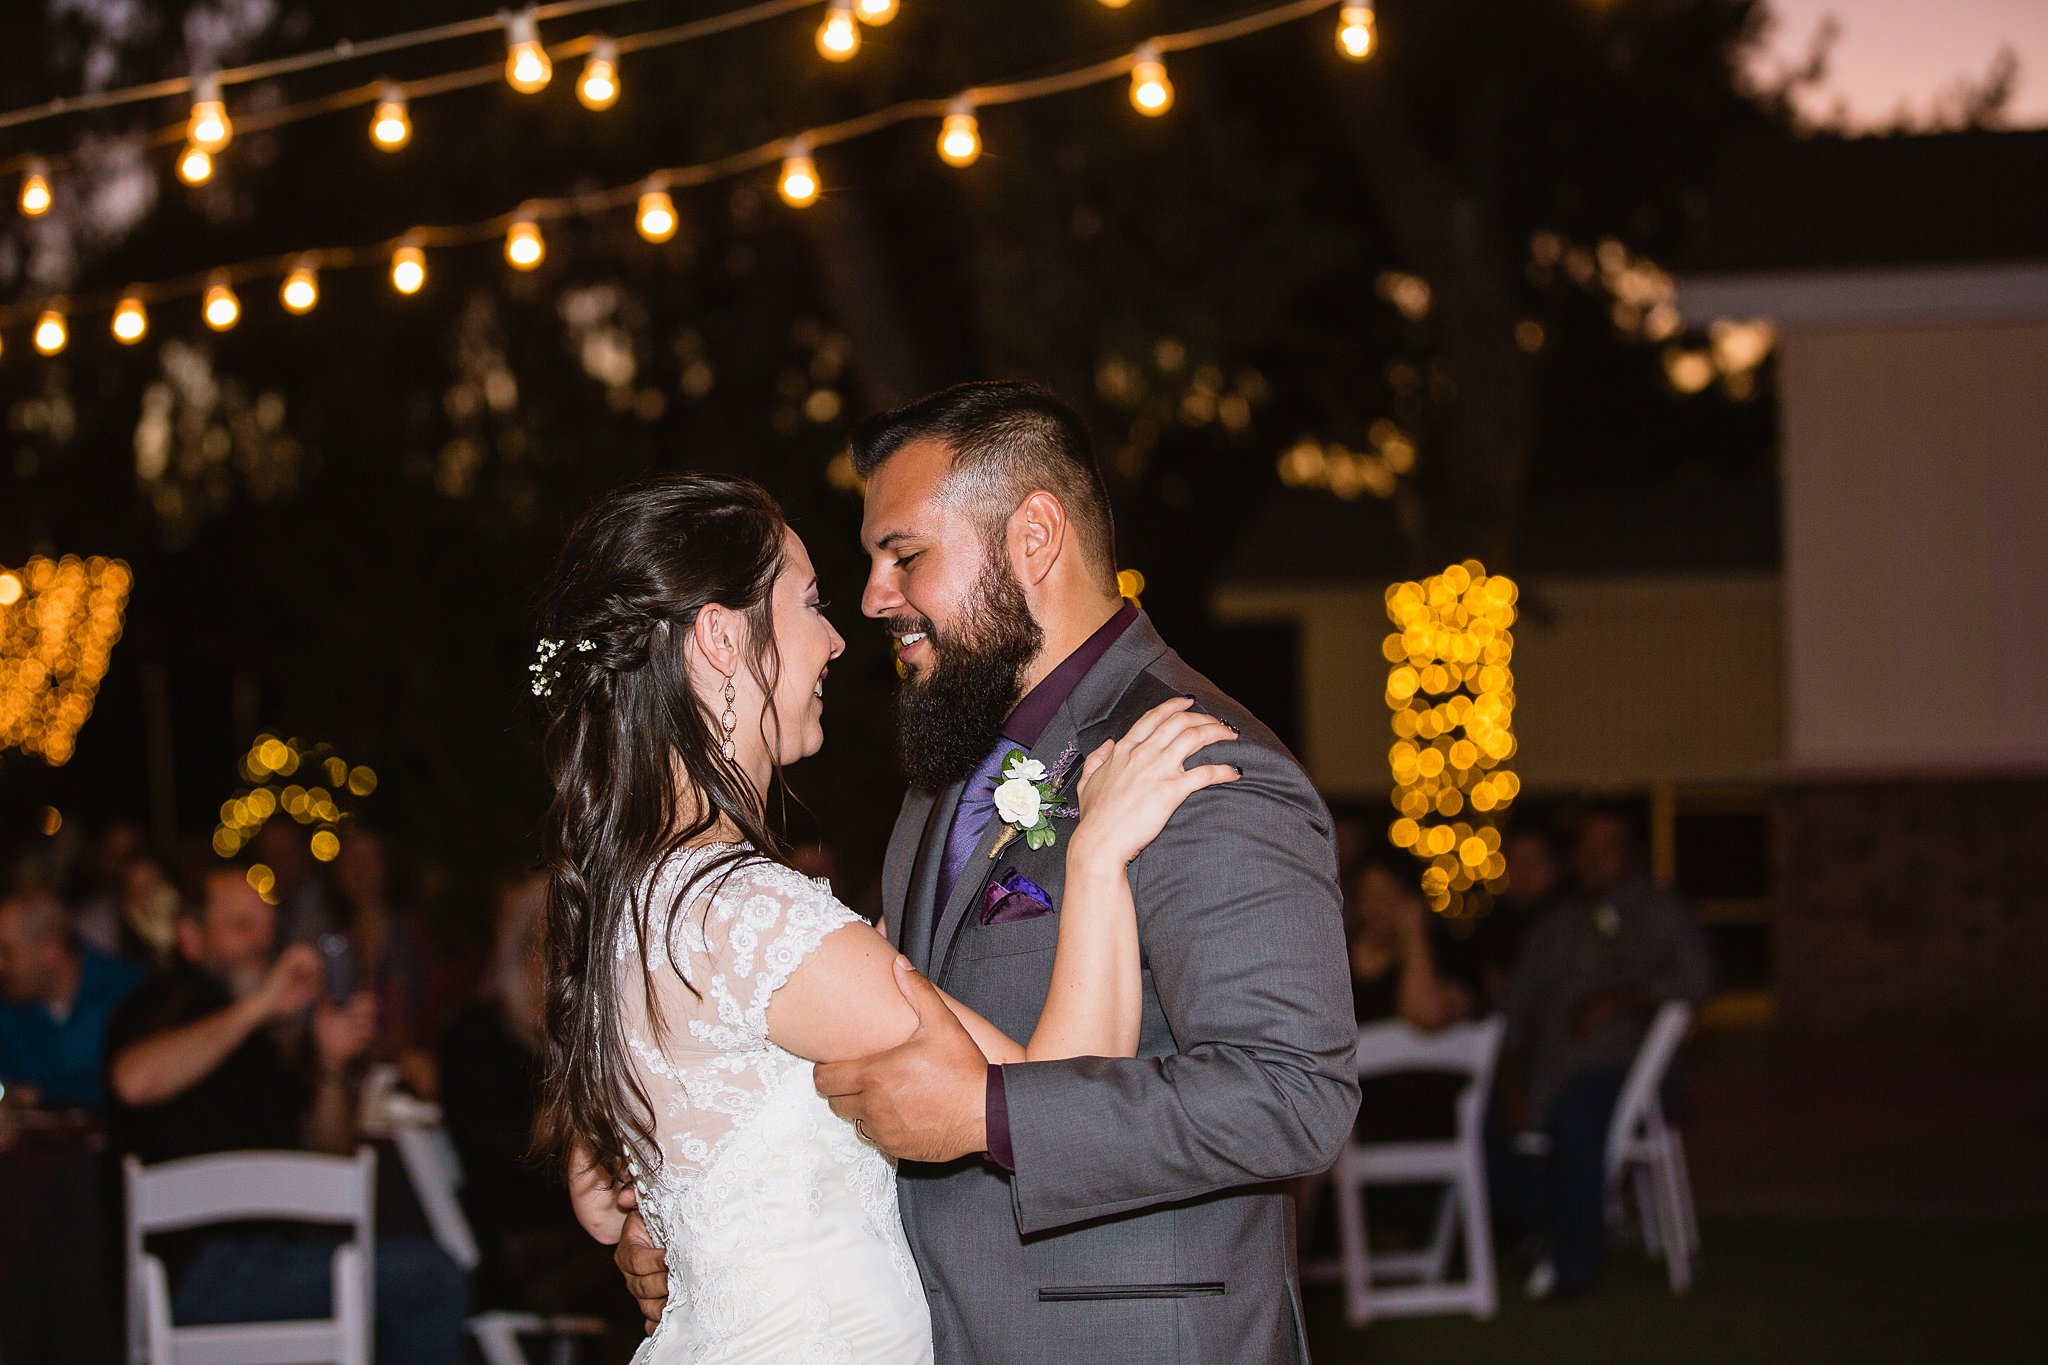 Bride and groom's first dance at their Schnepf Farms Farmhouse wedding reception by Arizona wedding photographer PMA Photography.